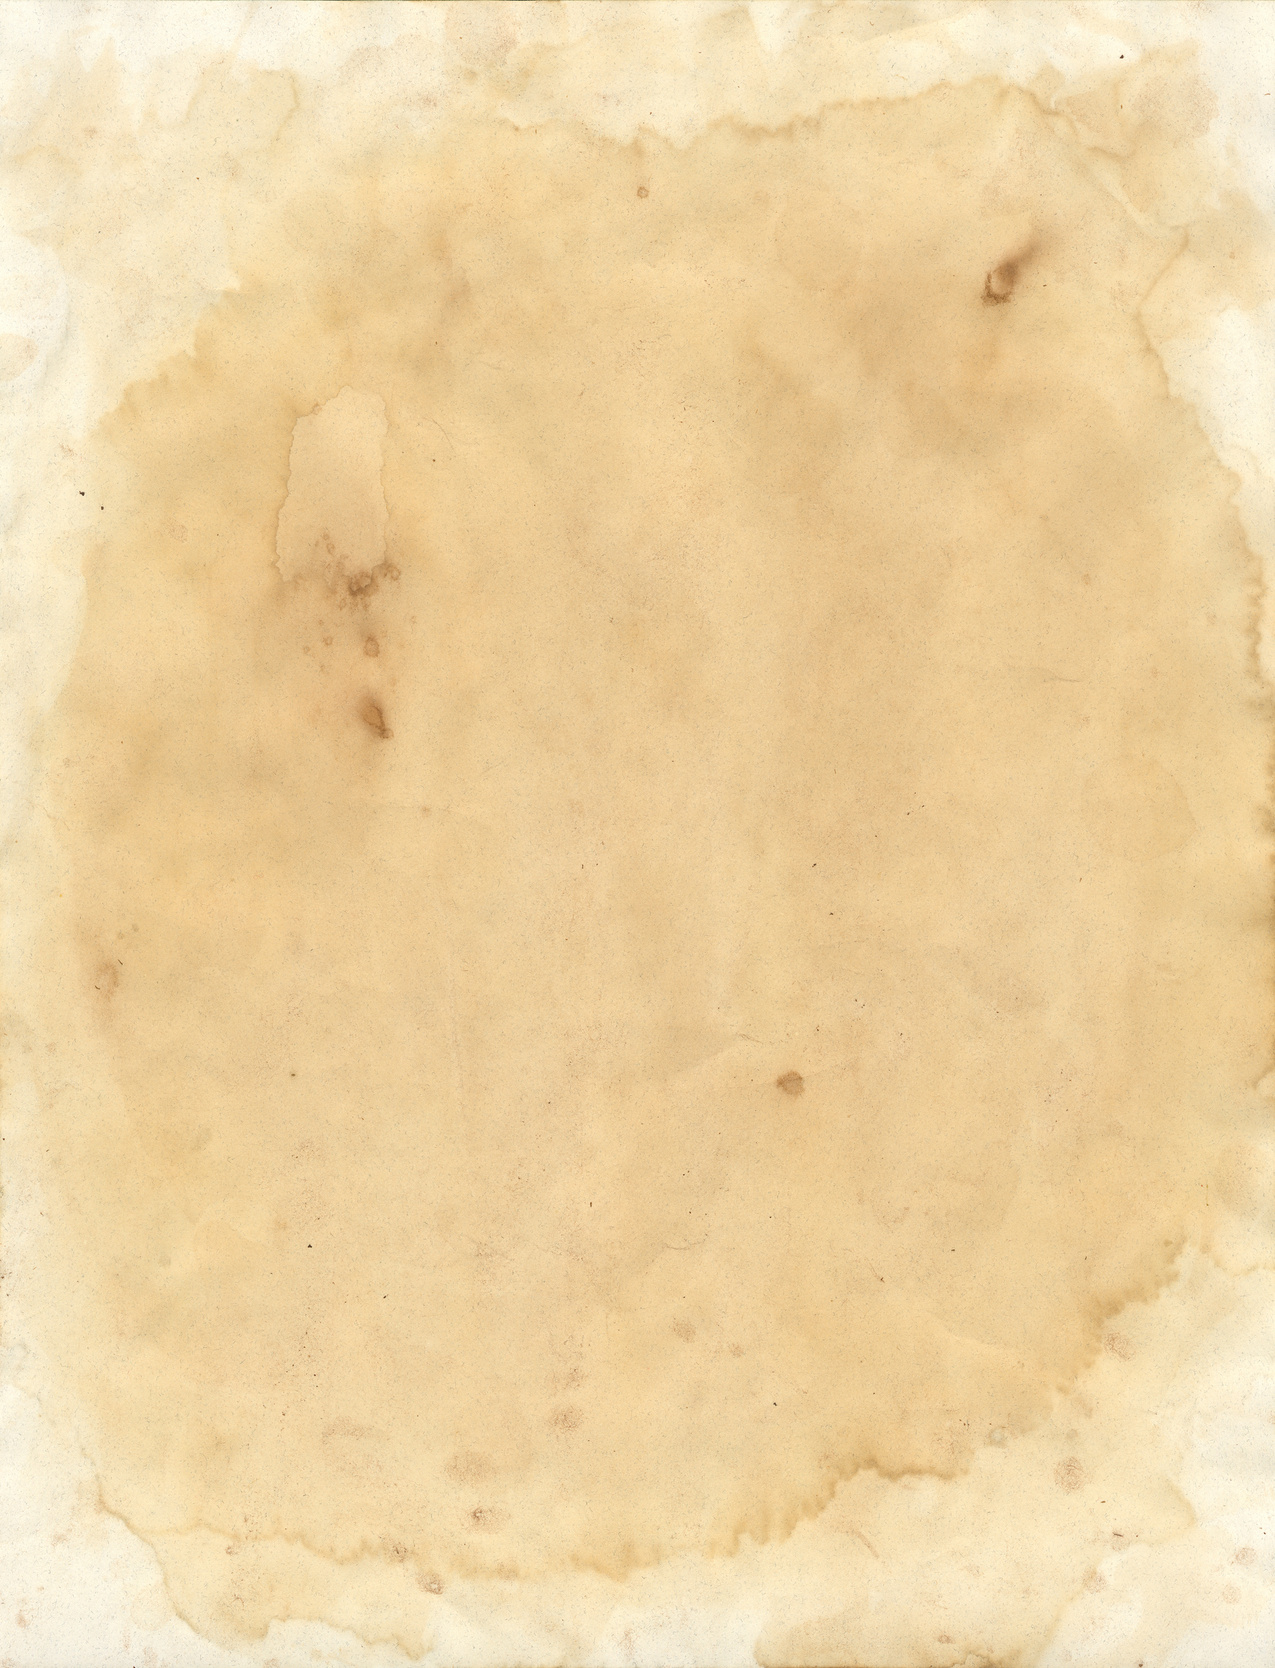 Wanted Poster Paper: Blank Beige and Brown-Stained Parchment